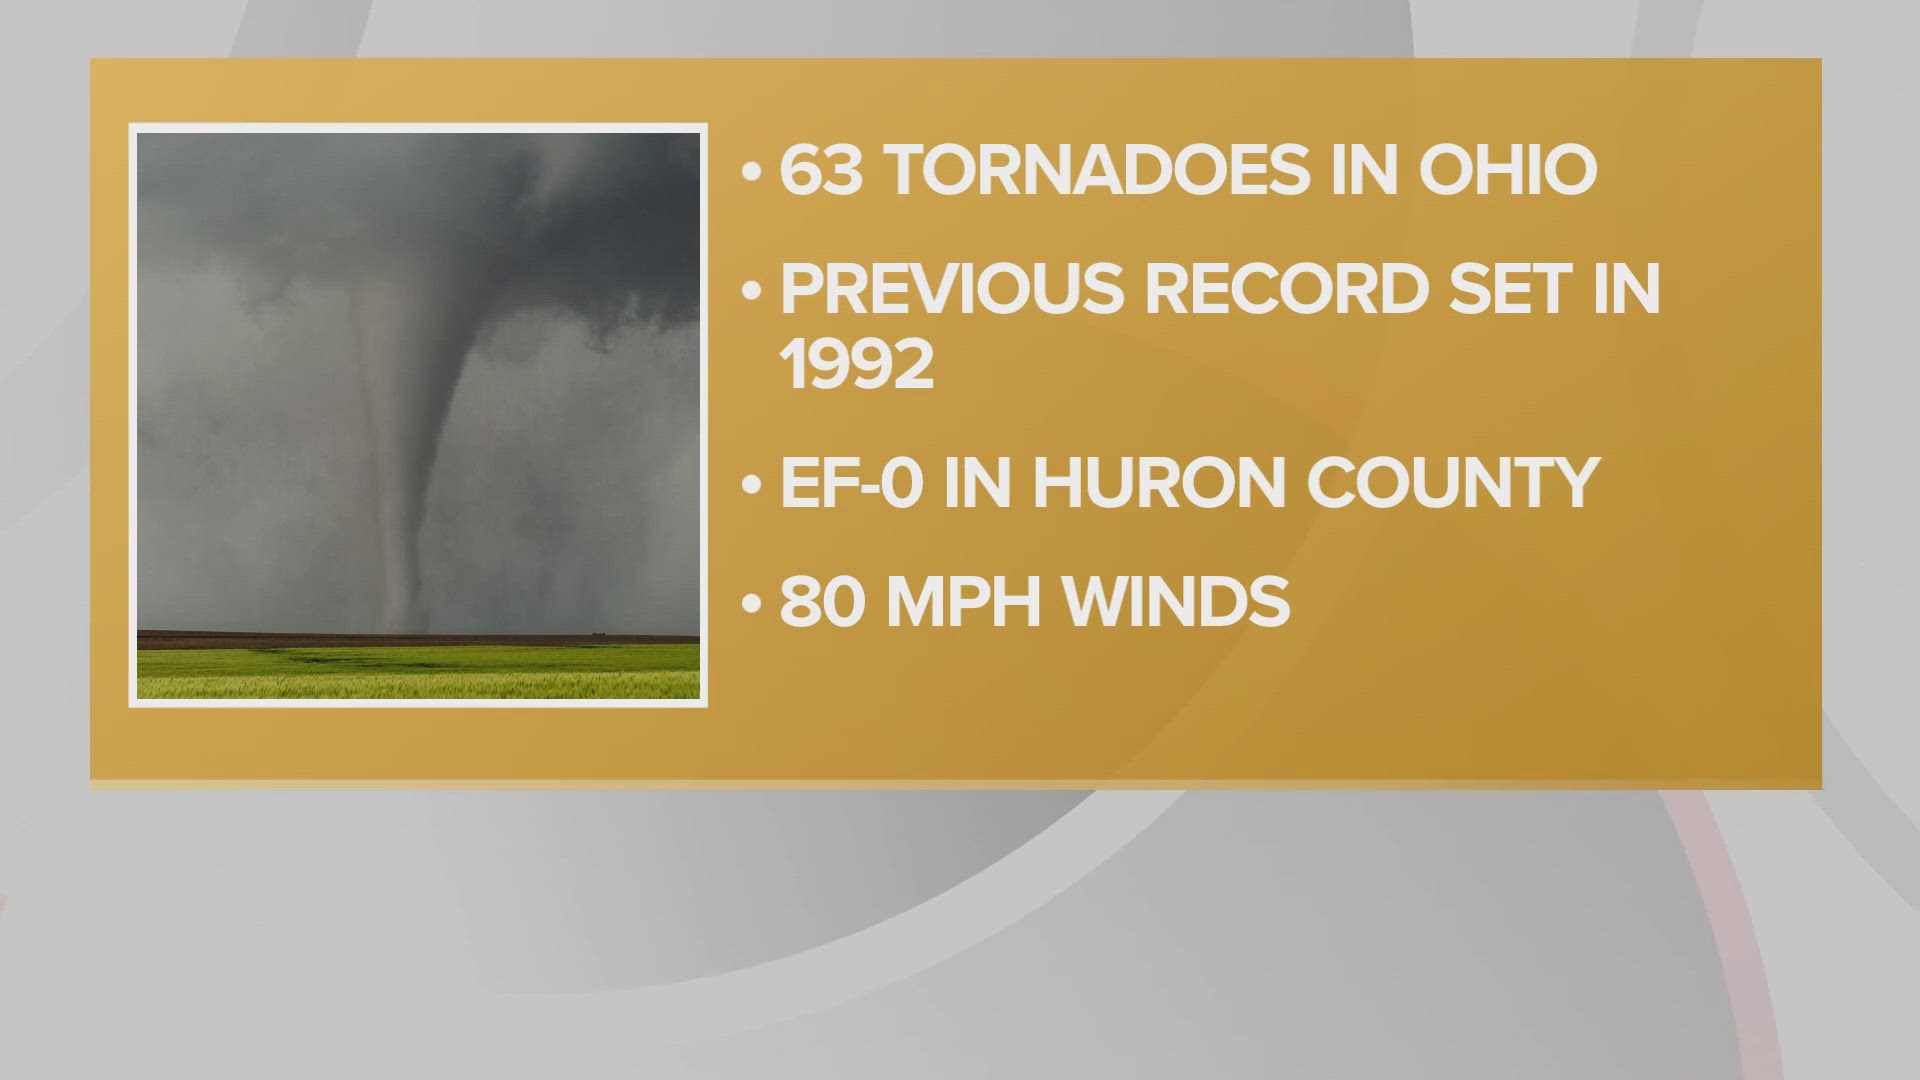 According to the National Weather Service in Cleveland, an EF-0 tornado touched down in Huron County on Saturday, the 63rd so far this year.